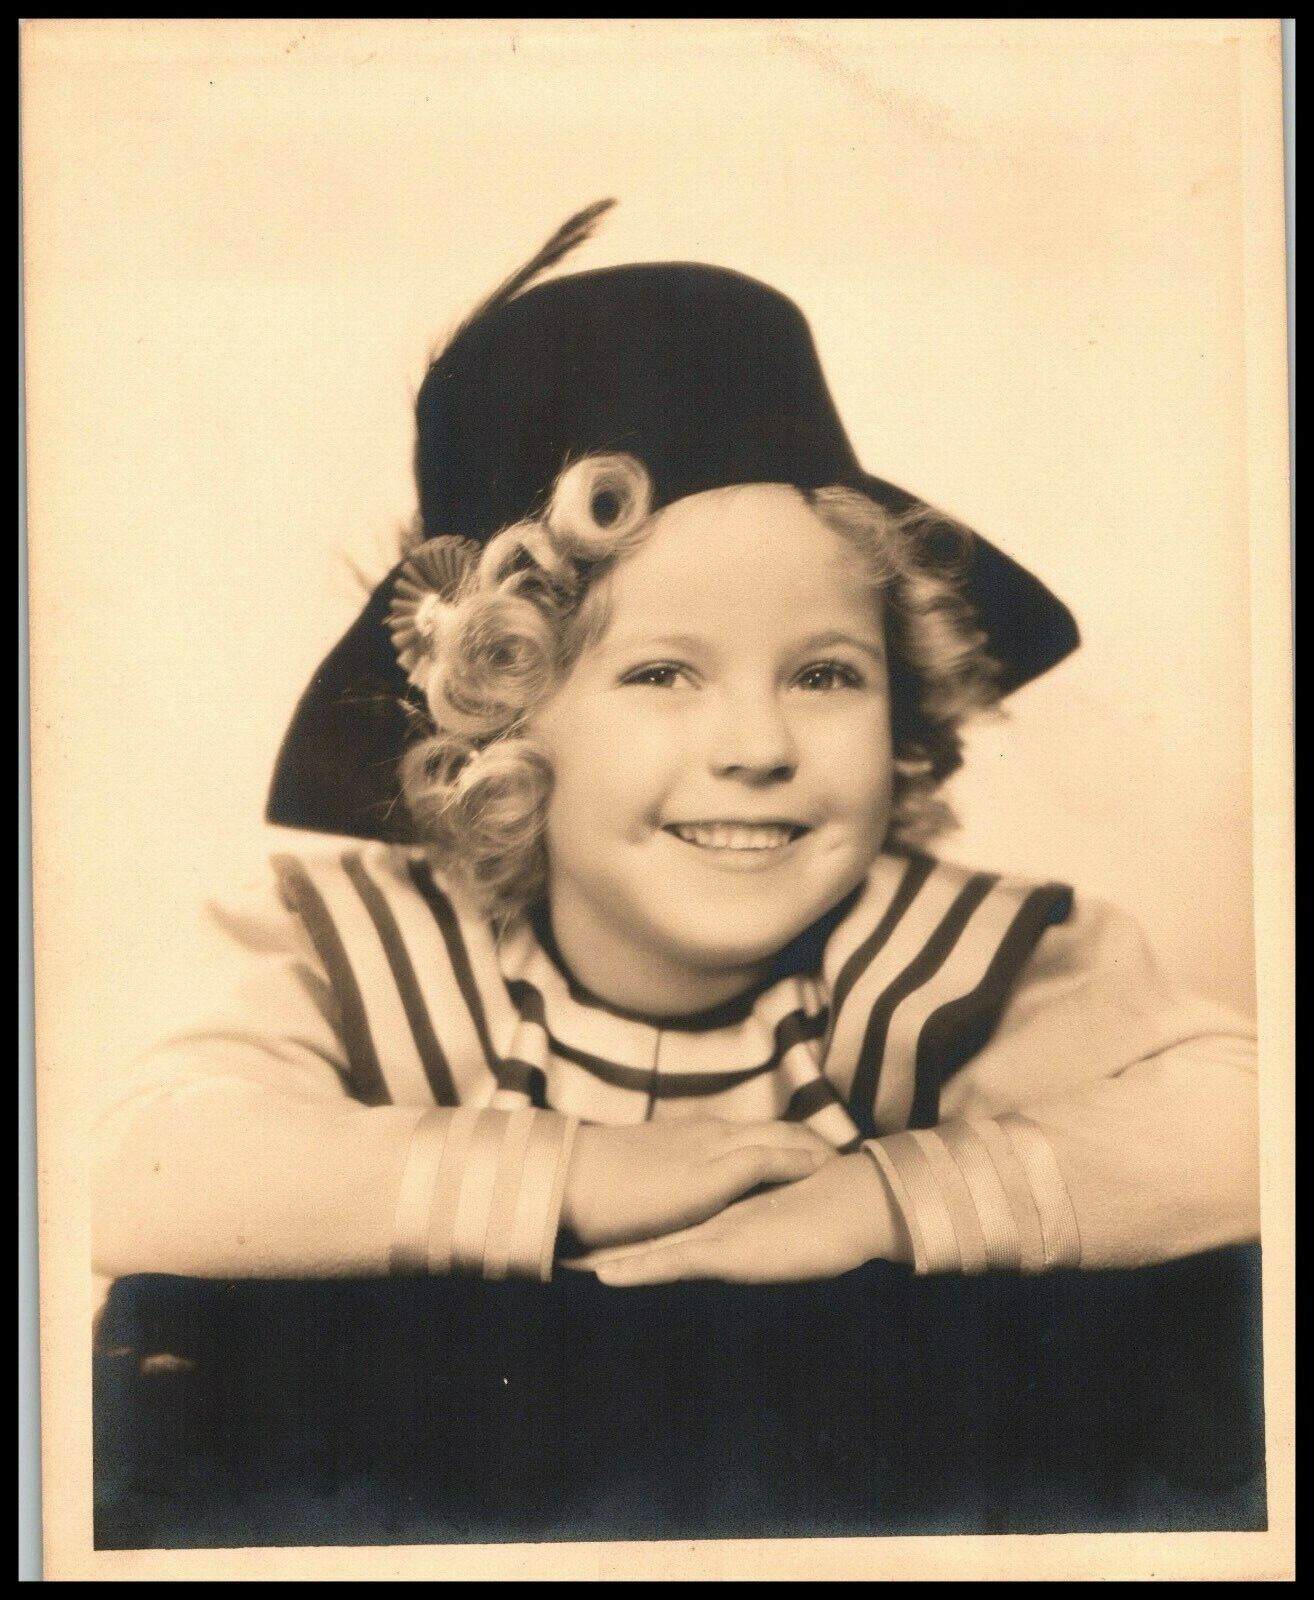 SHIRLEY TEMPLE ICONIC GIRL ACTRESS HOLLYWOOD 1930s CUTE POSE ORIG DBW PHOTO 609